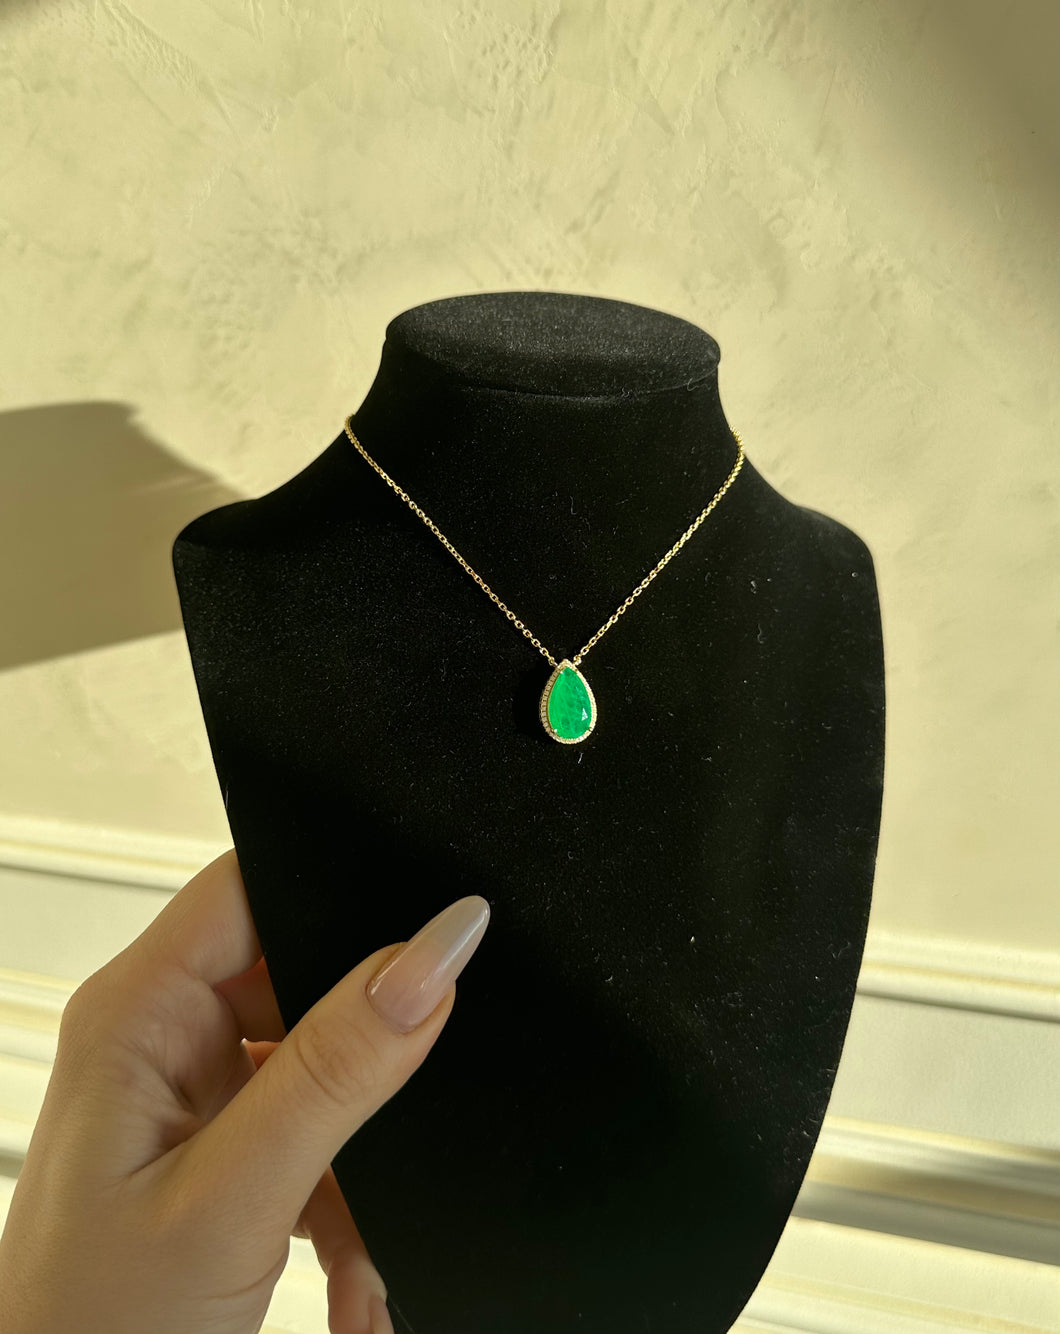 The Pear Emerald Necklace